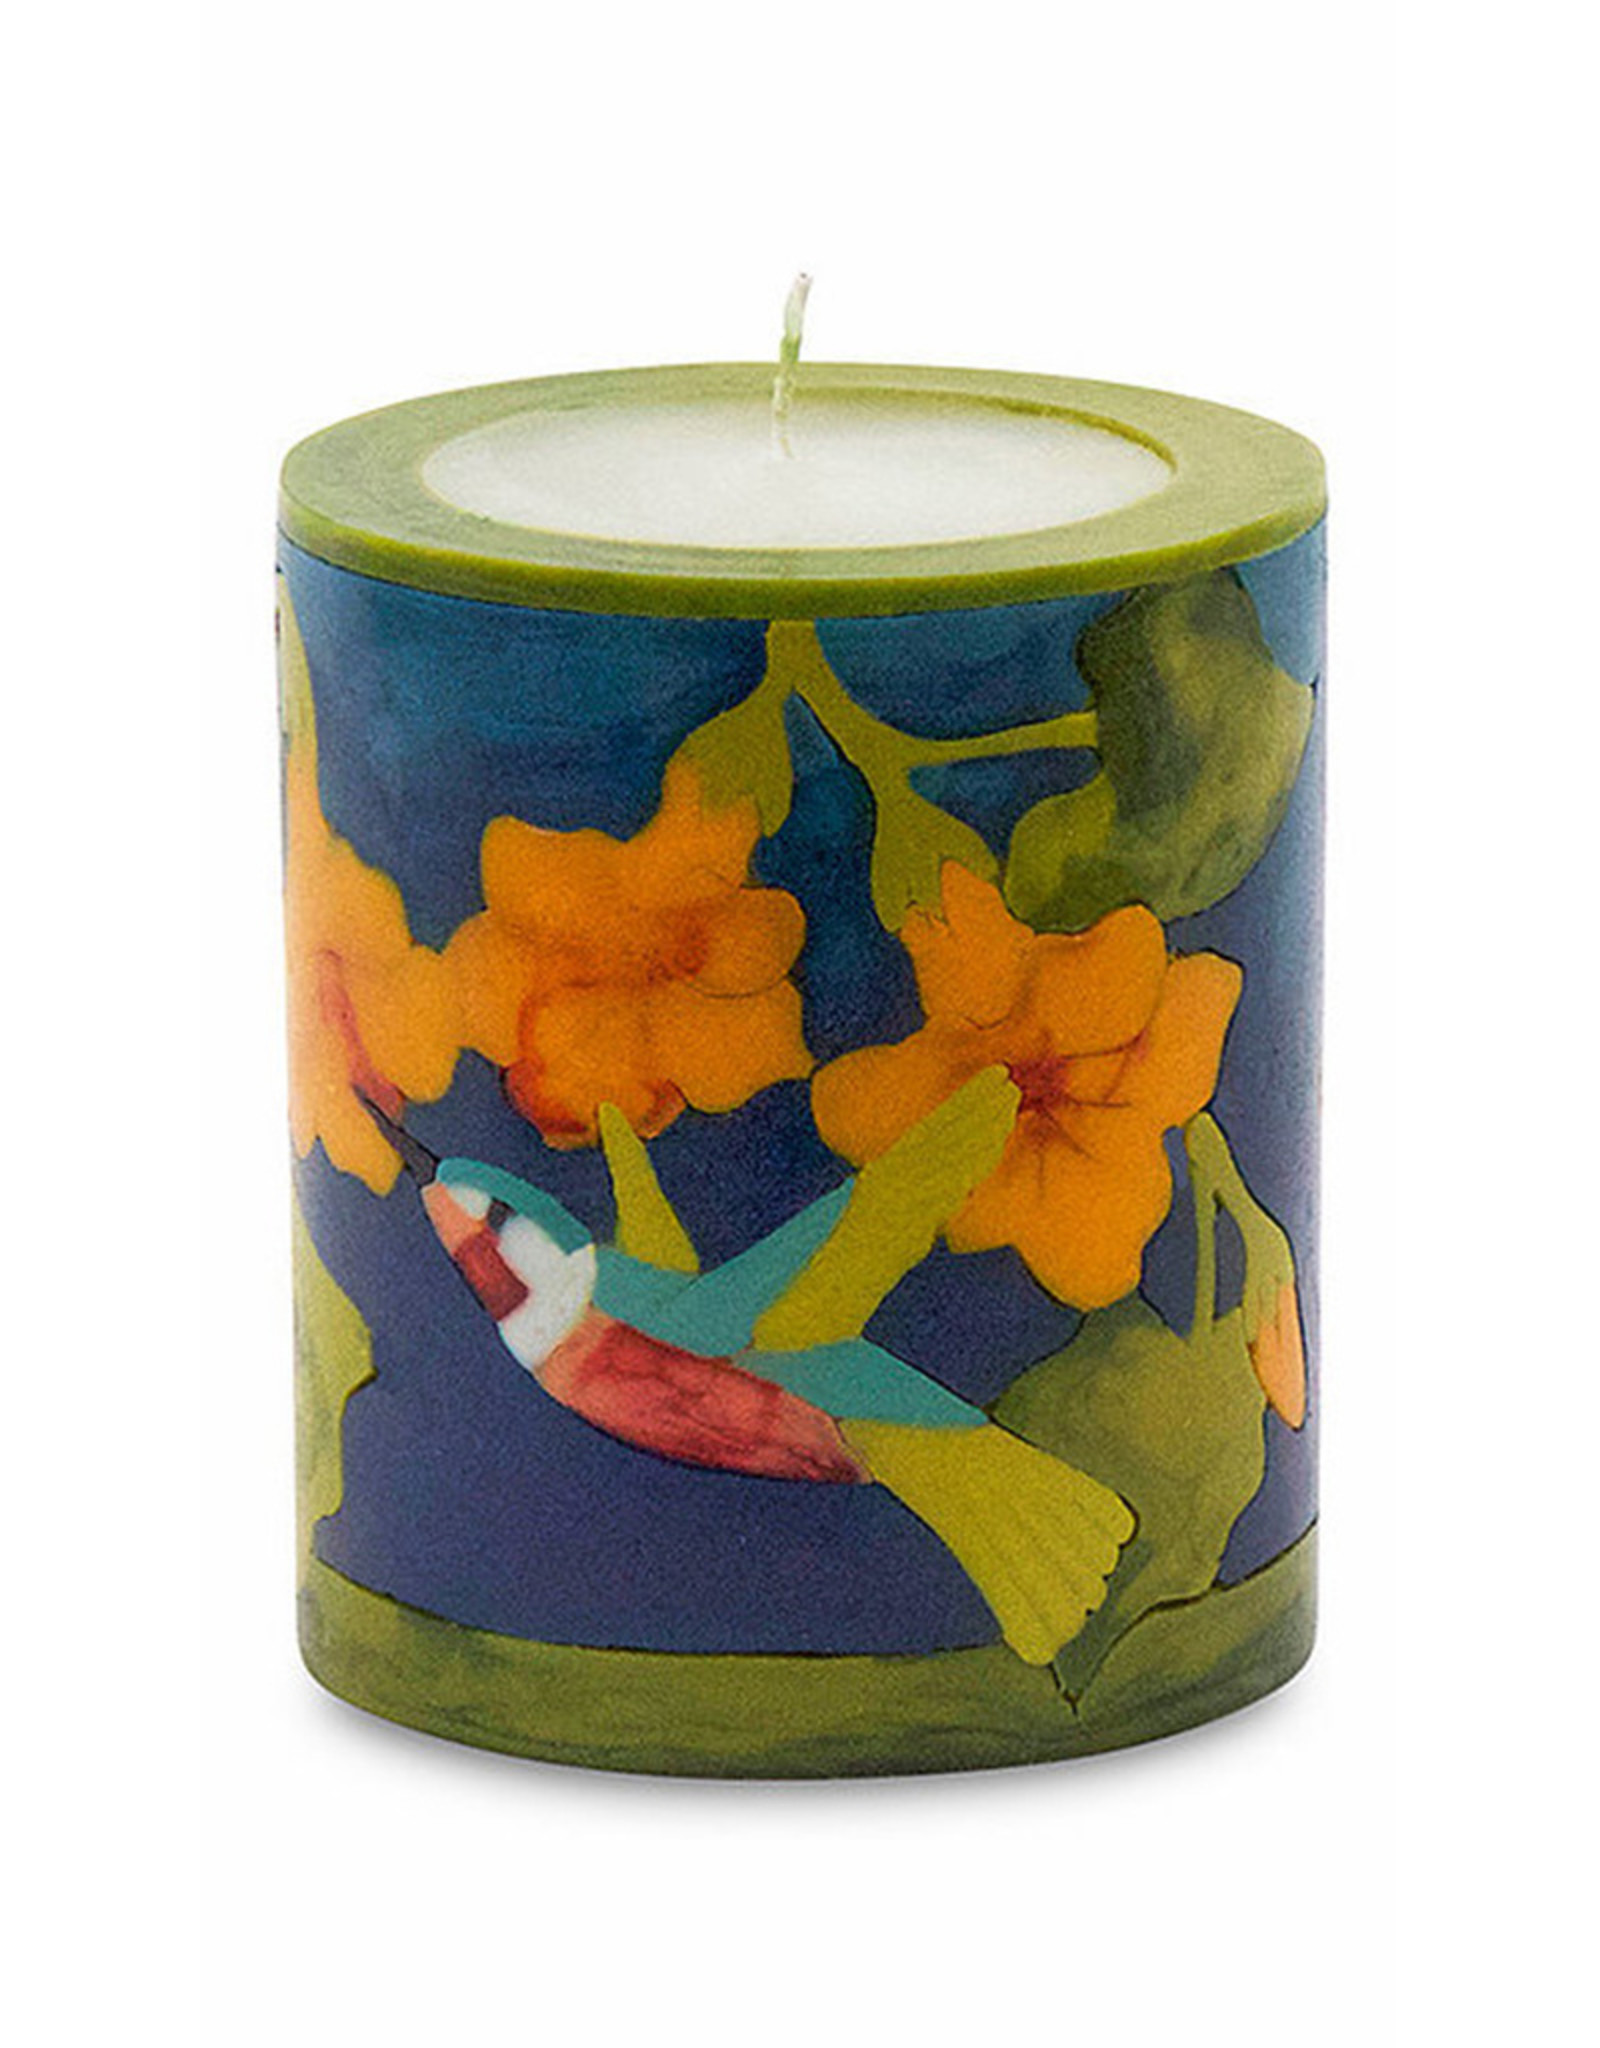 MOON ALLEY SMALL HUMMINGBIRD CANDLE